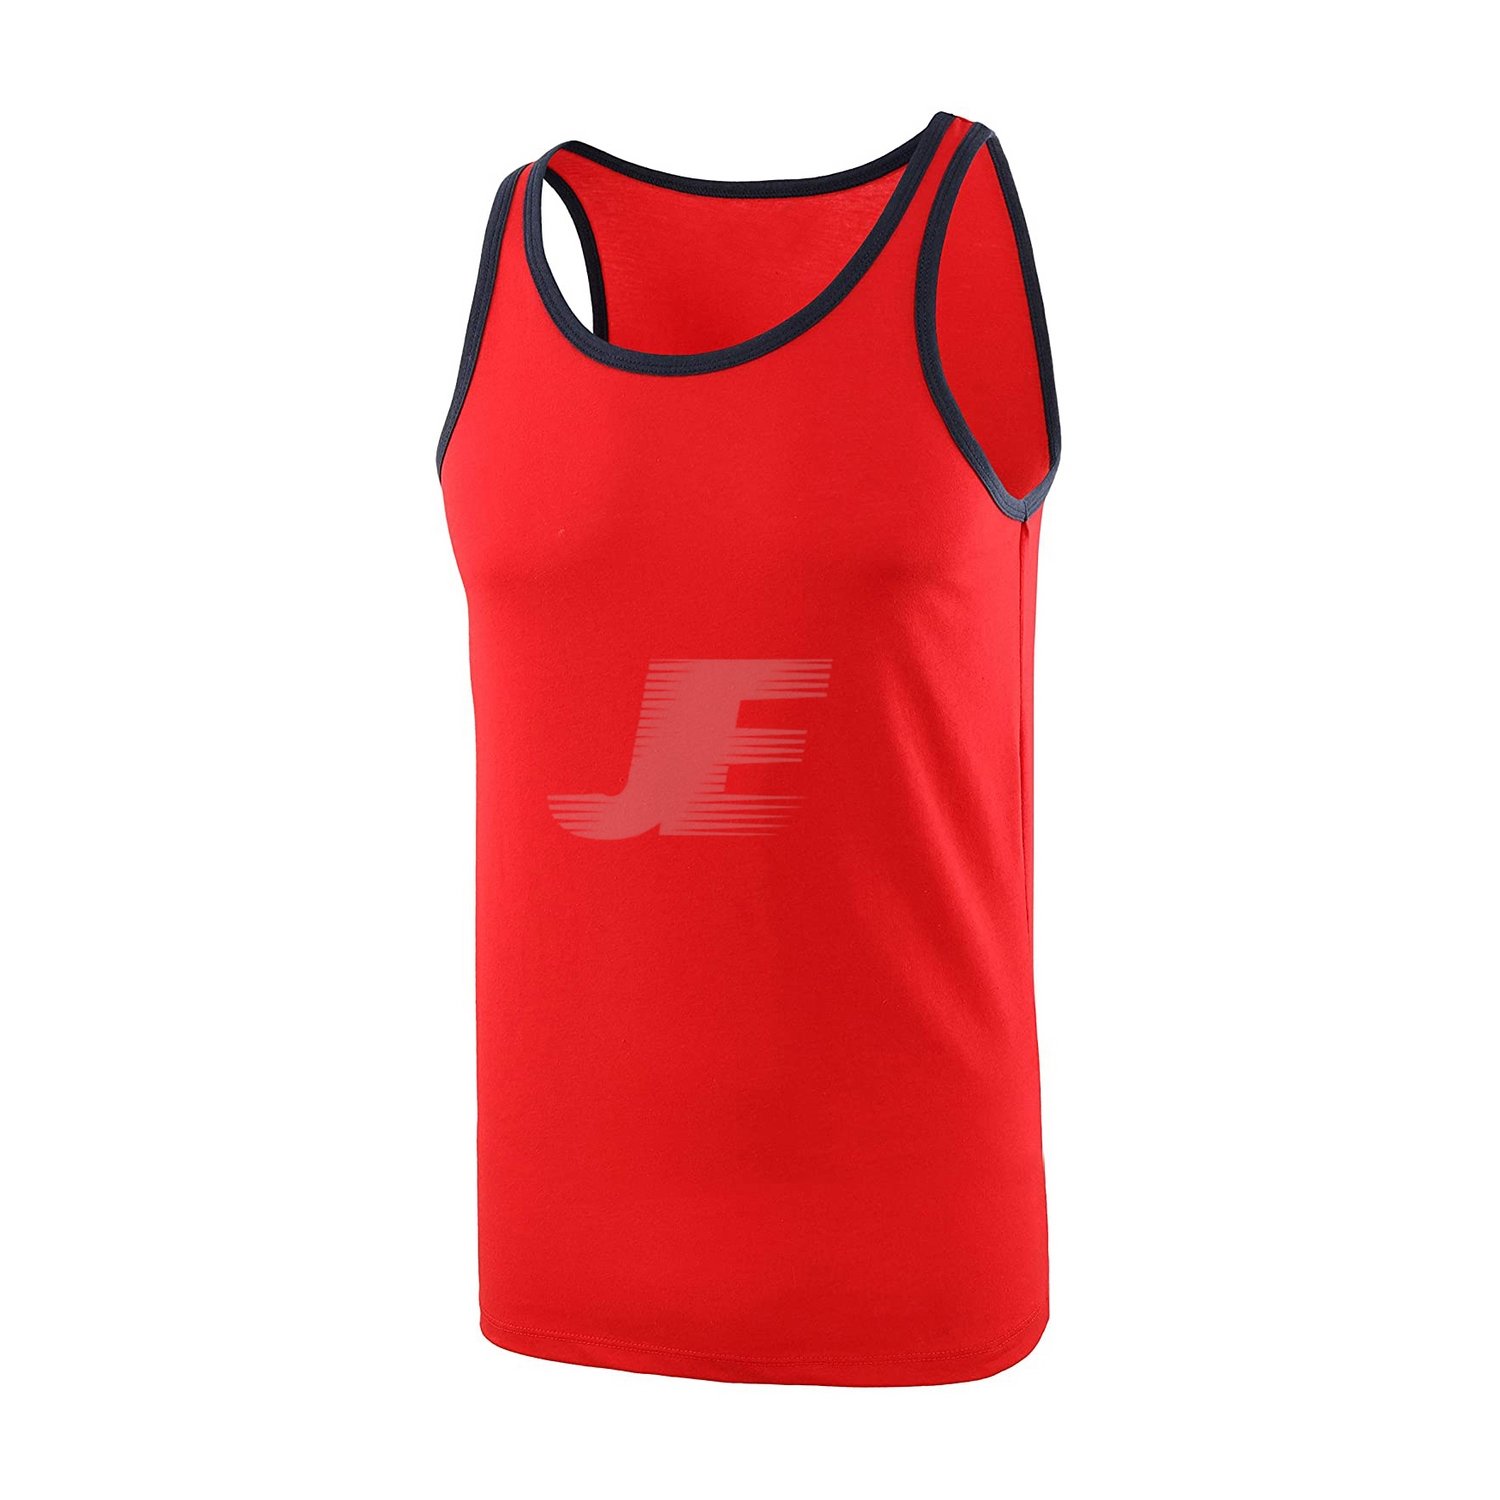 Men's Gym Wear Red Tank Top With Black Piping